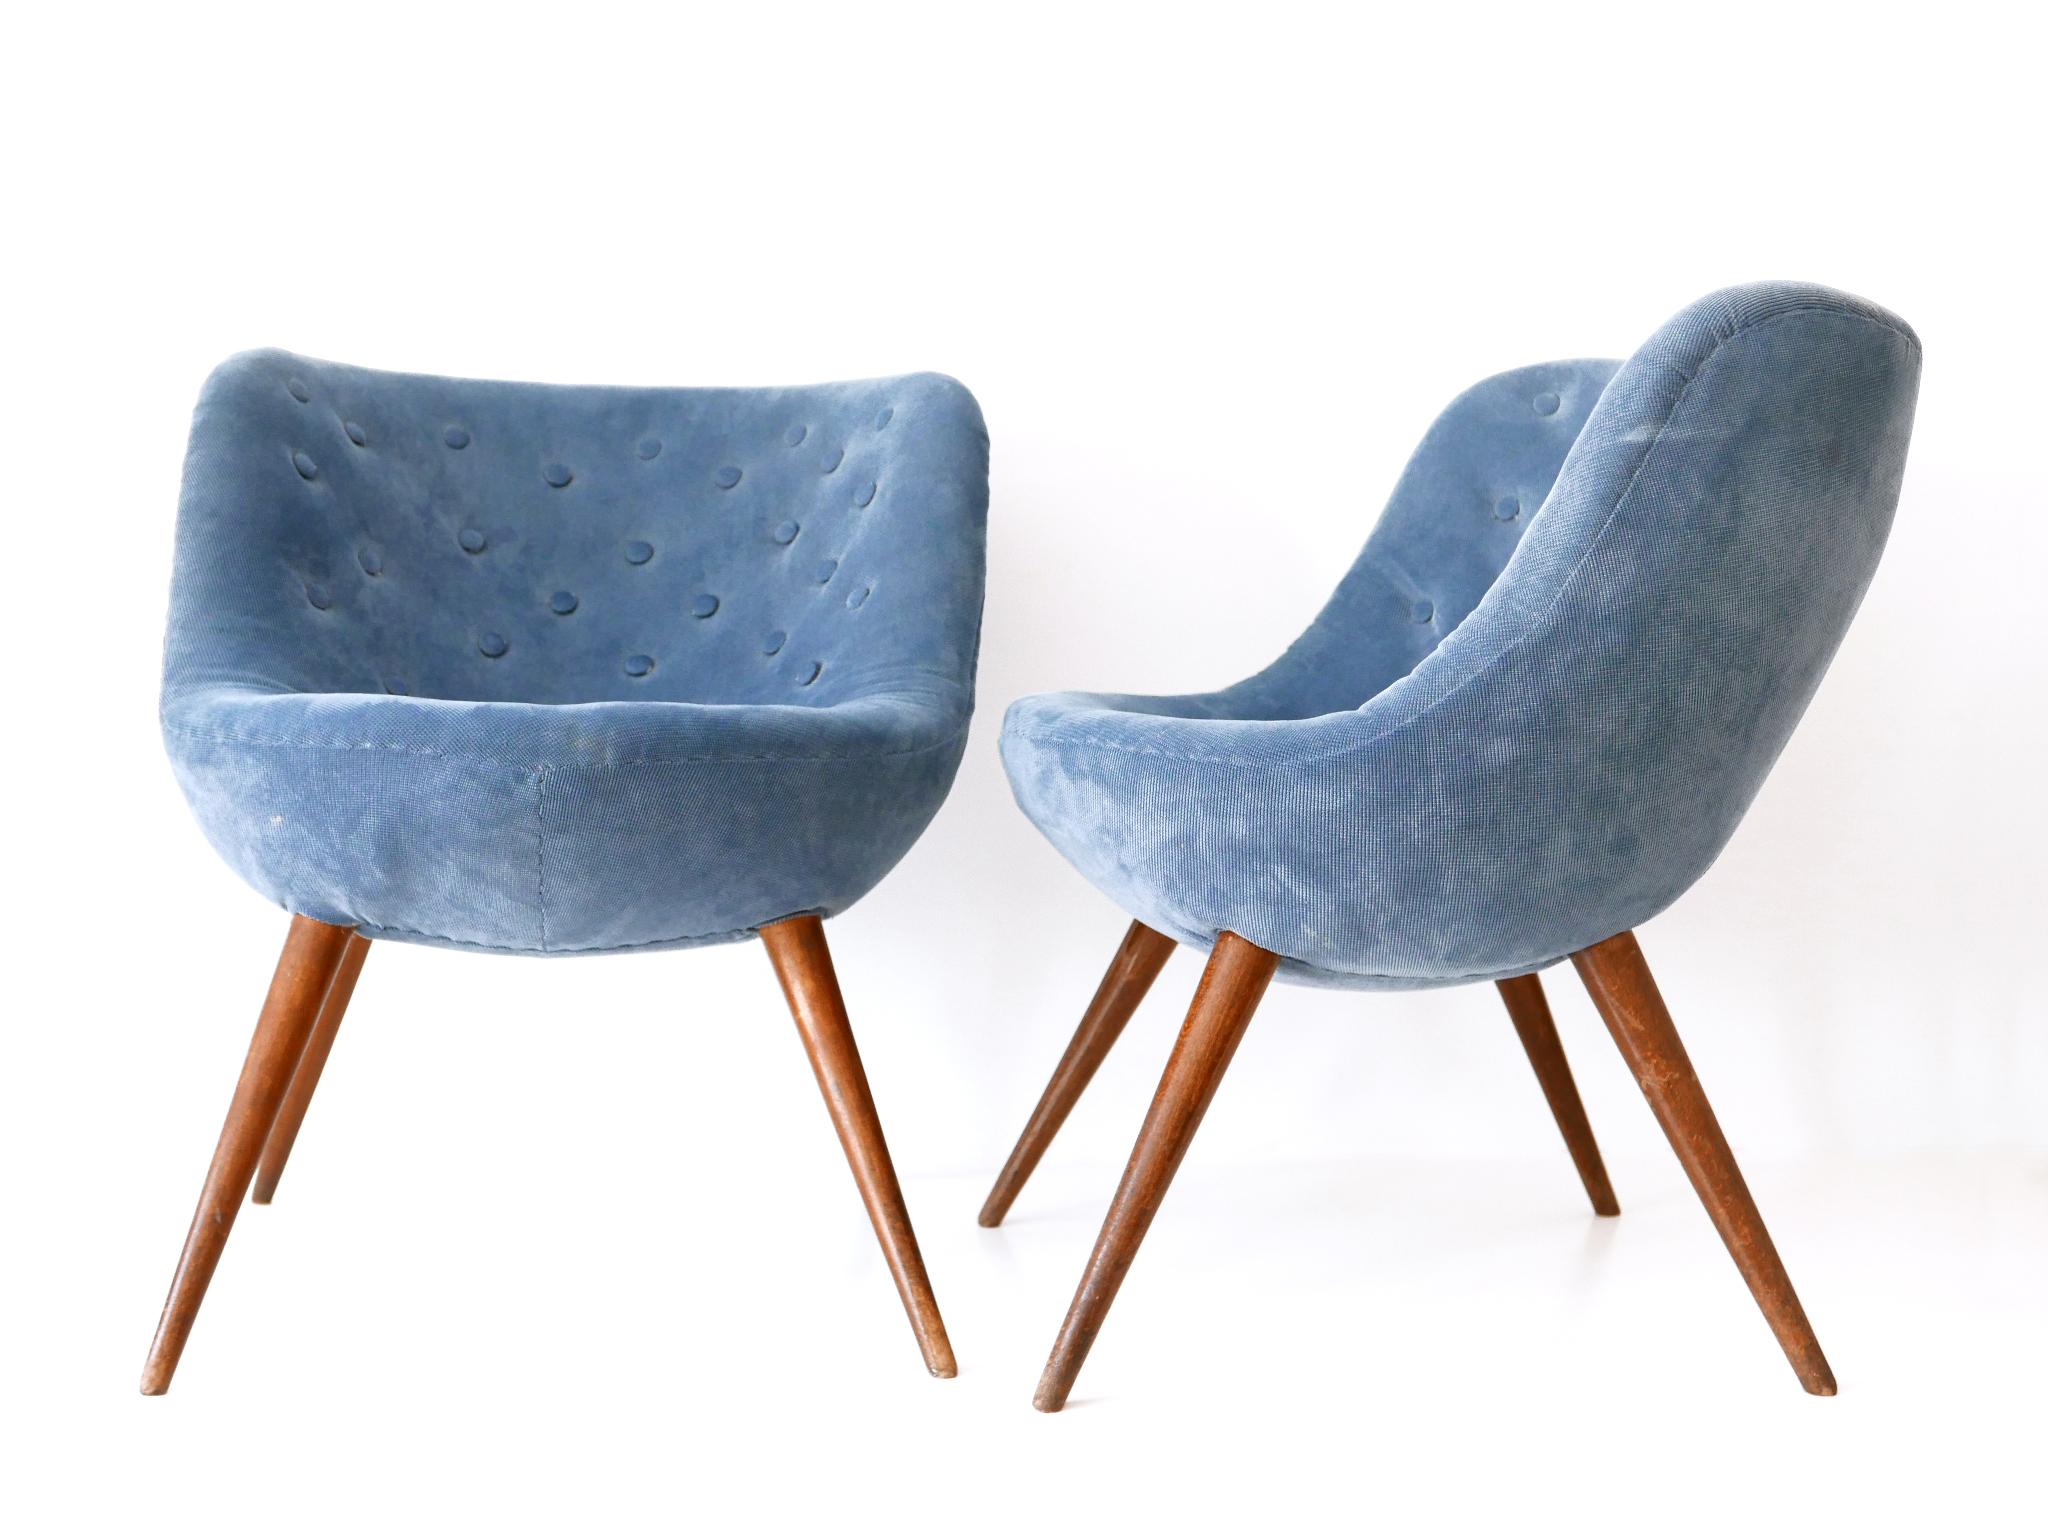 Set of two extremely rare and lovely Mid-Century Modern lounge easy chairs. Designed by Fritz Neth (attributed) for Correcta, Germany, 1950s.

The chairs are reupholstered by the previous owner.
It is up to the buyer whether he/she takes another